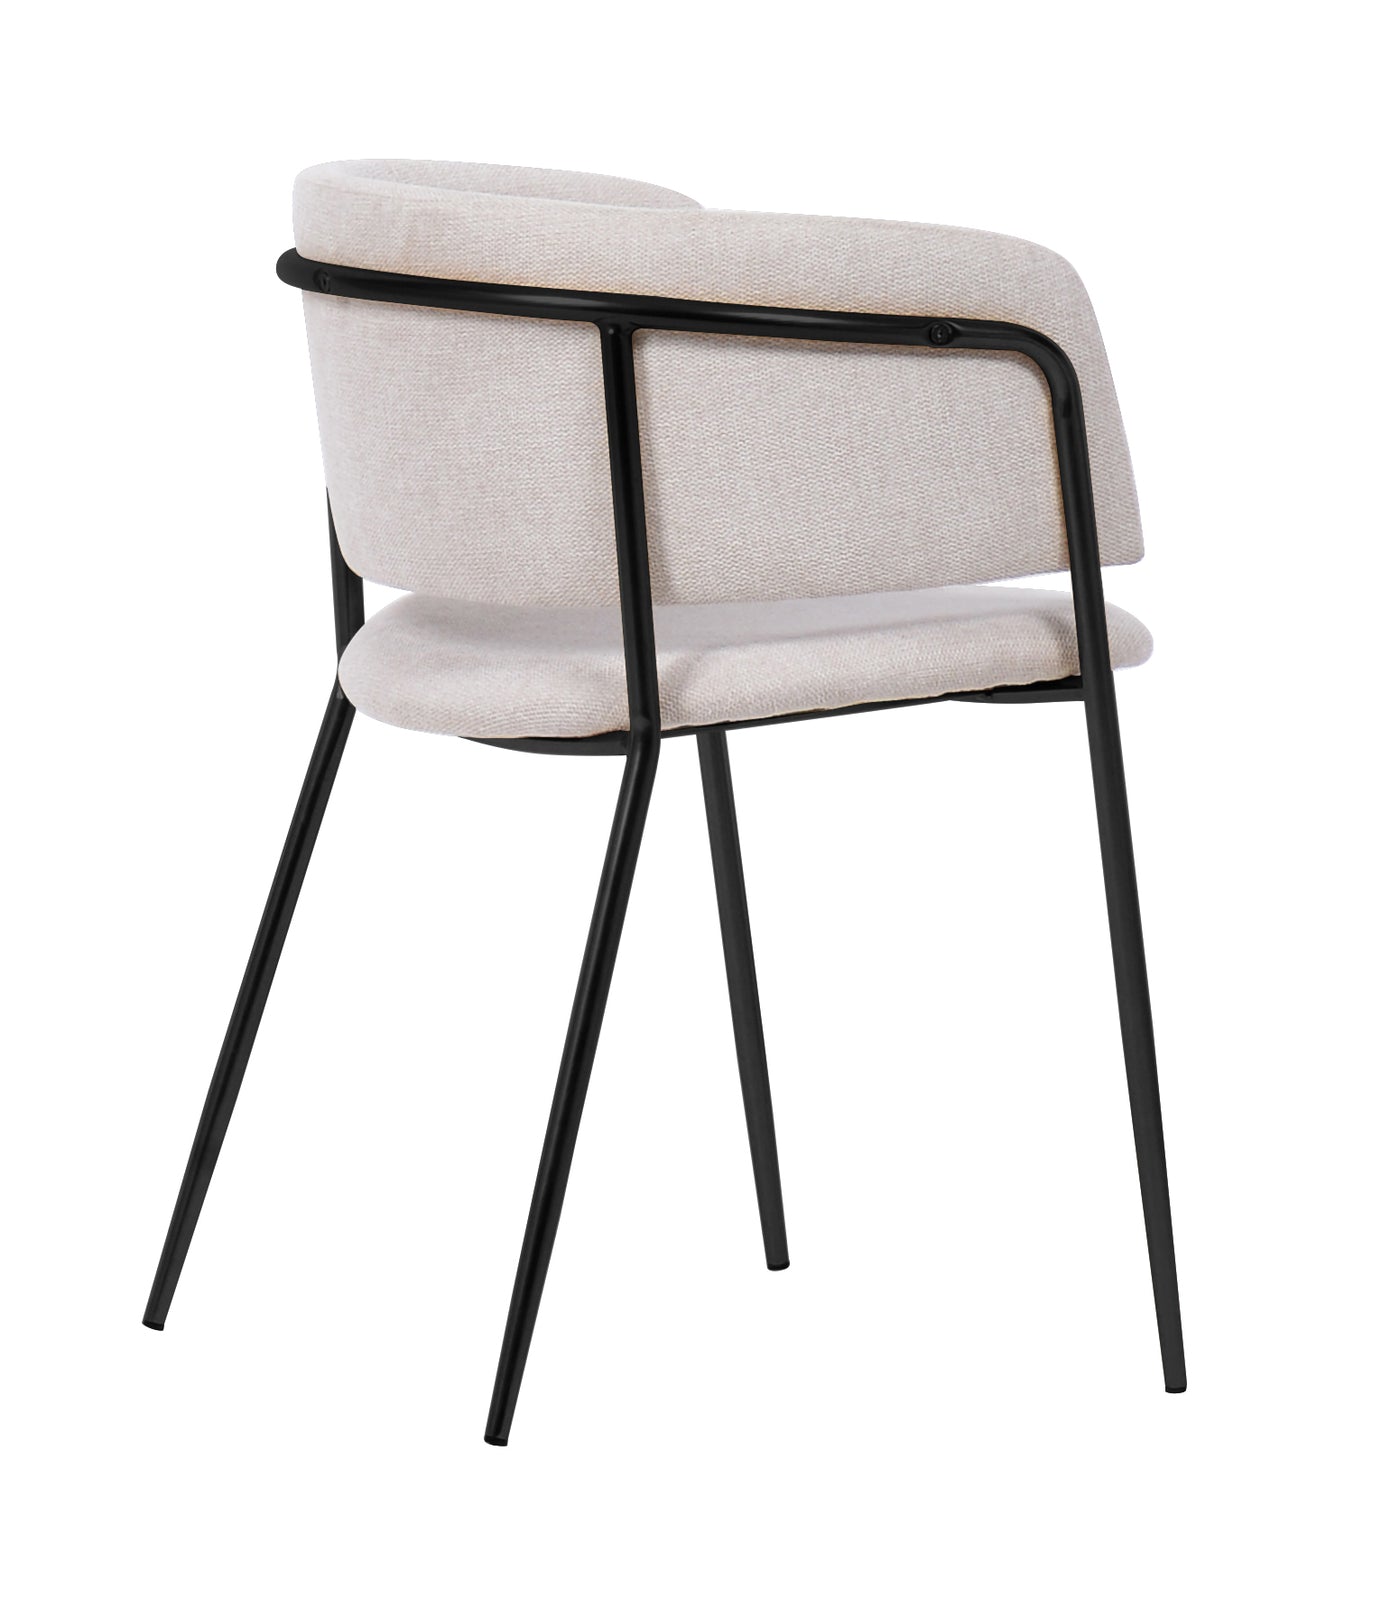 Nell Dining Chair Beige Fabric - Black Frame - Future Classics Furniture